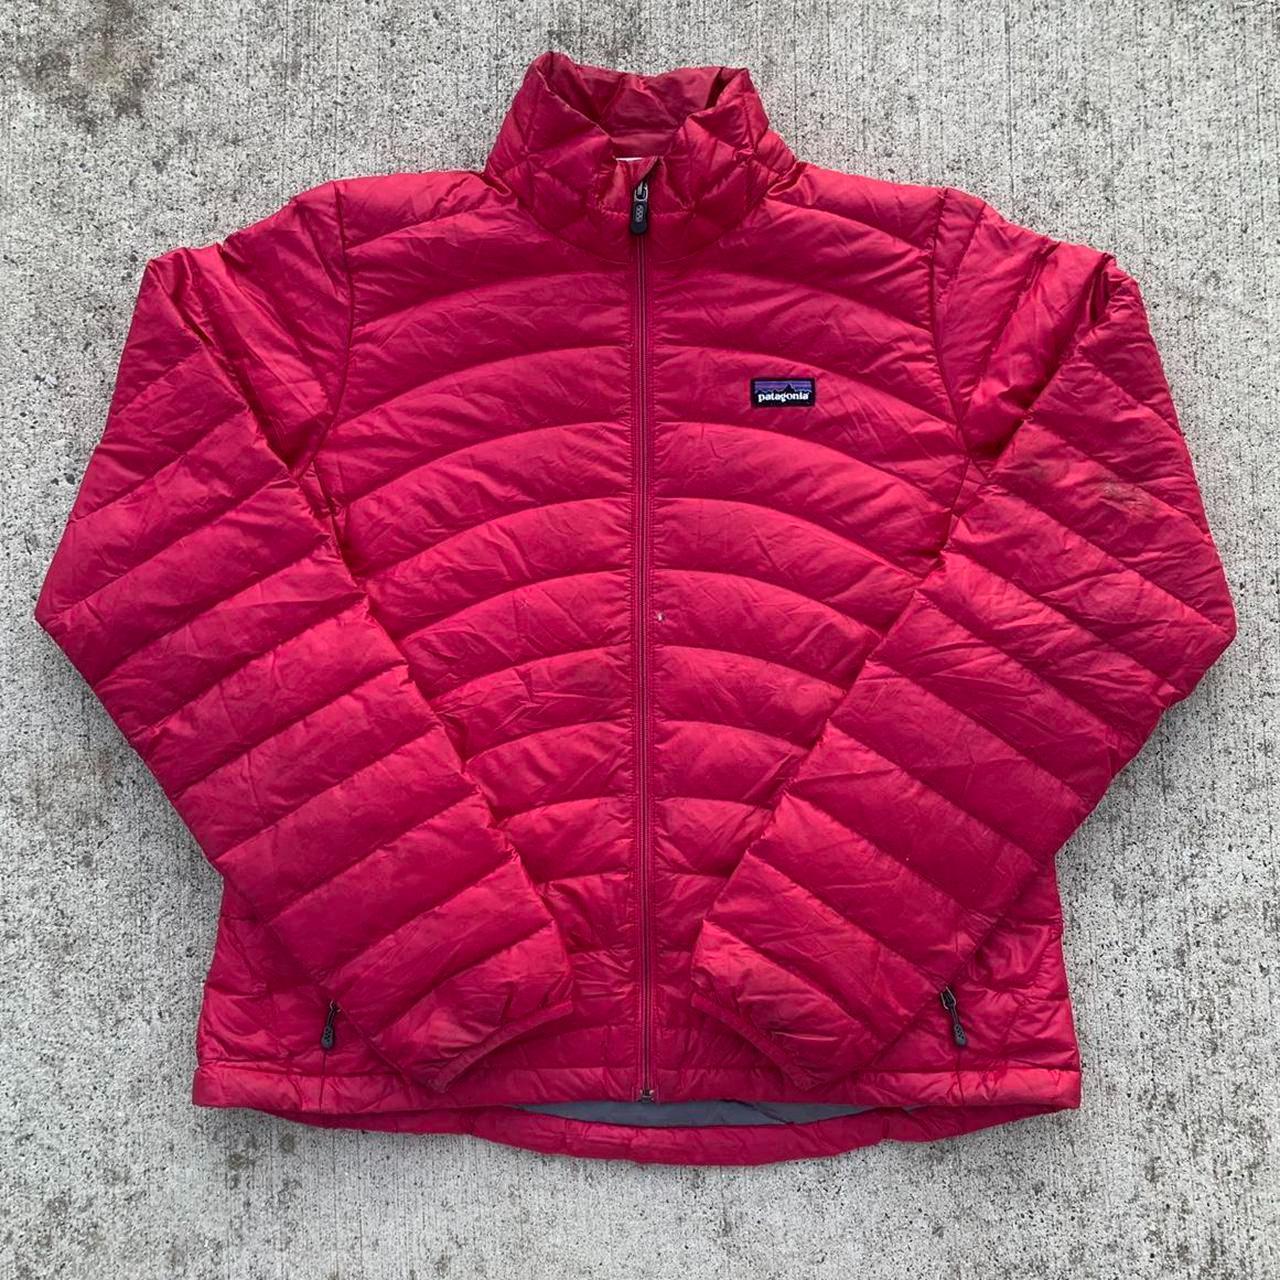 Product Image 1 - Patagonia Puffer Jacket
Condition: used, needs